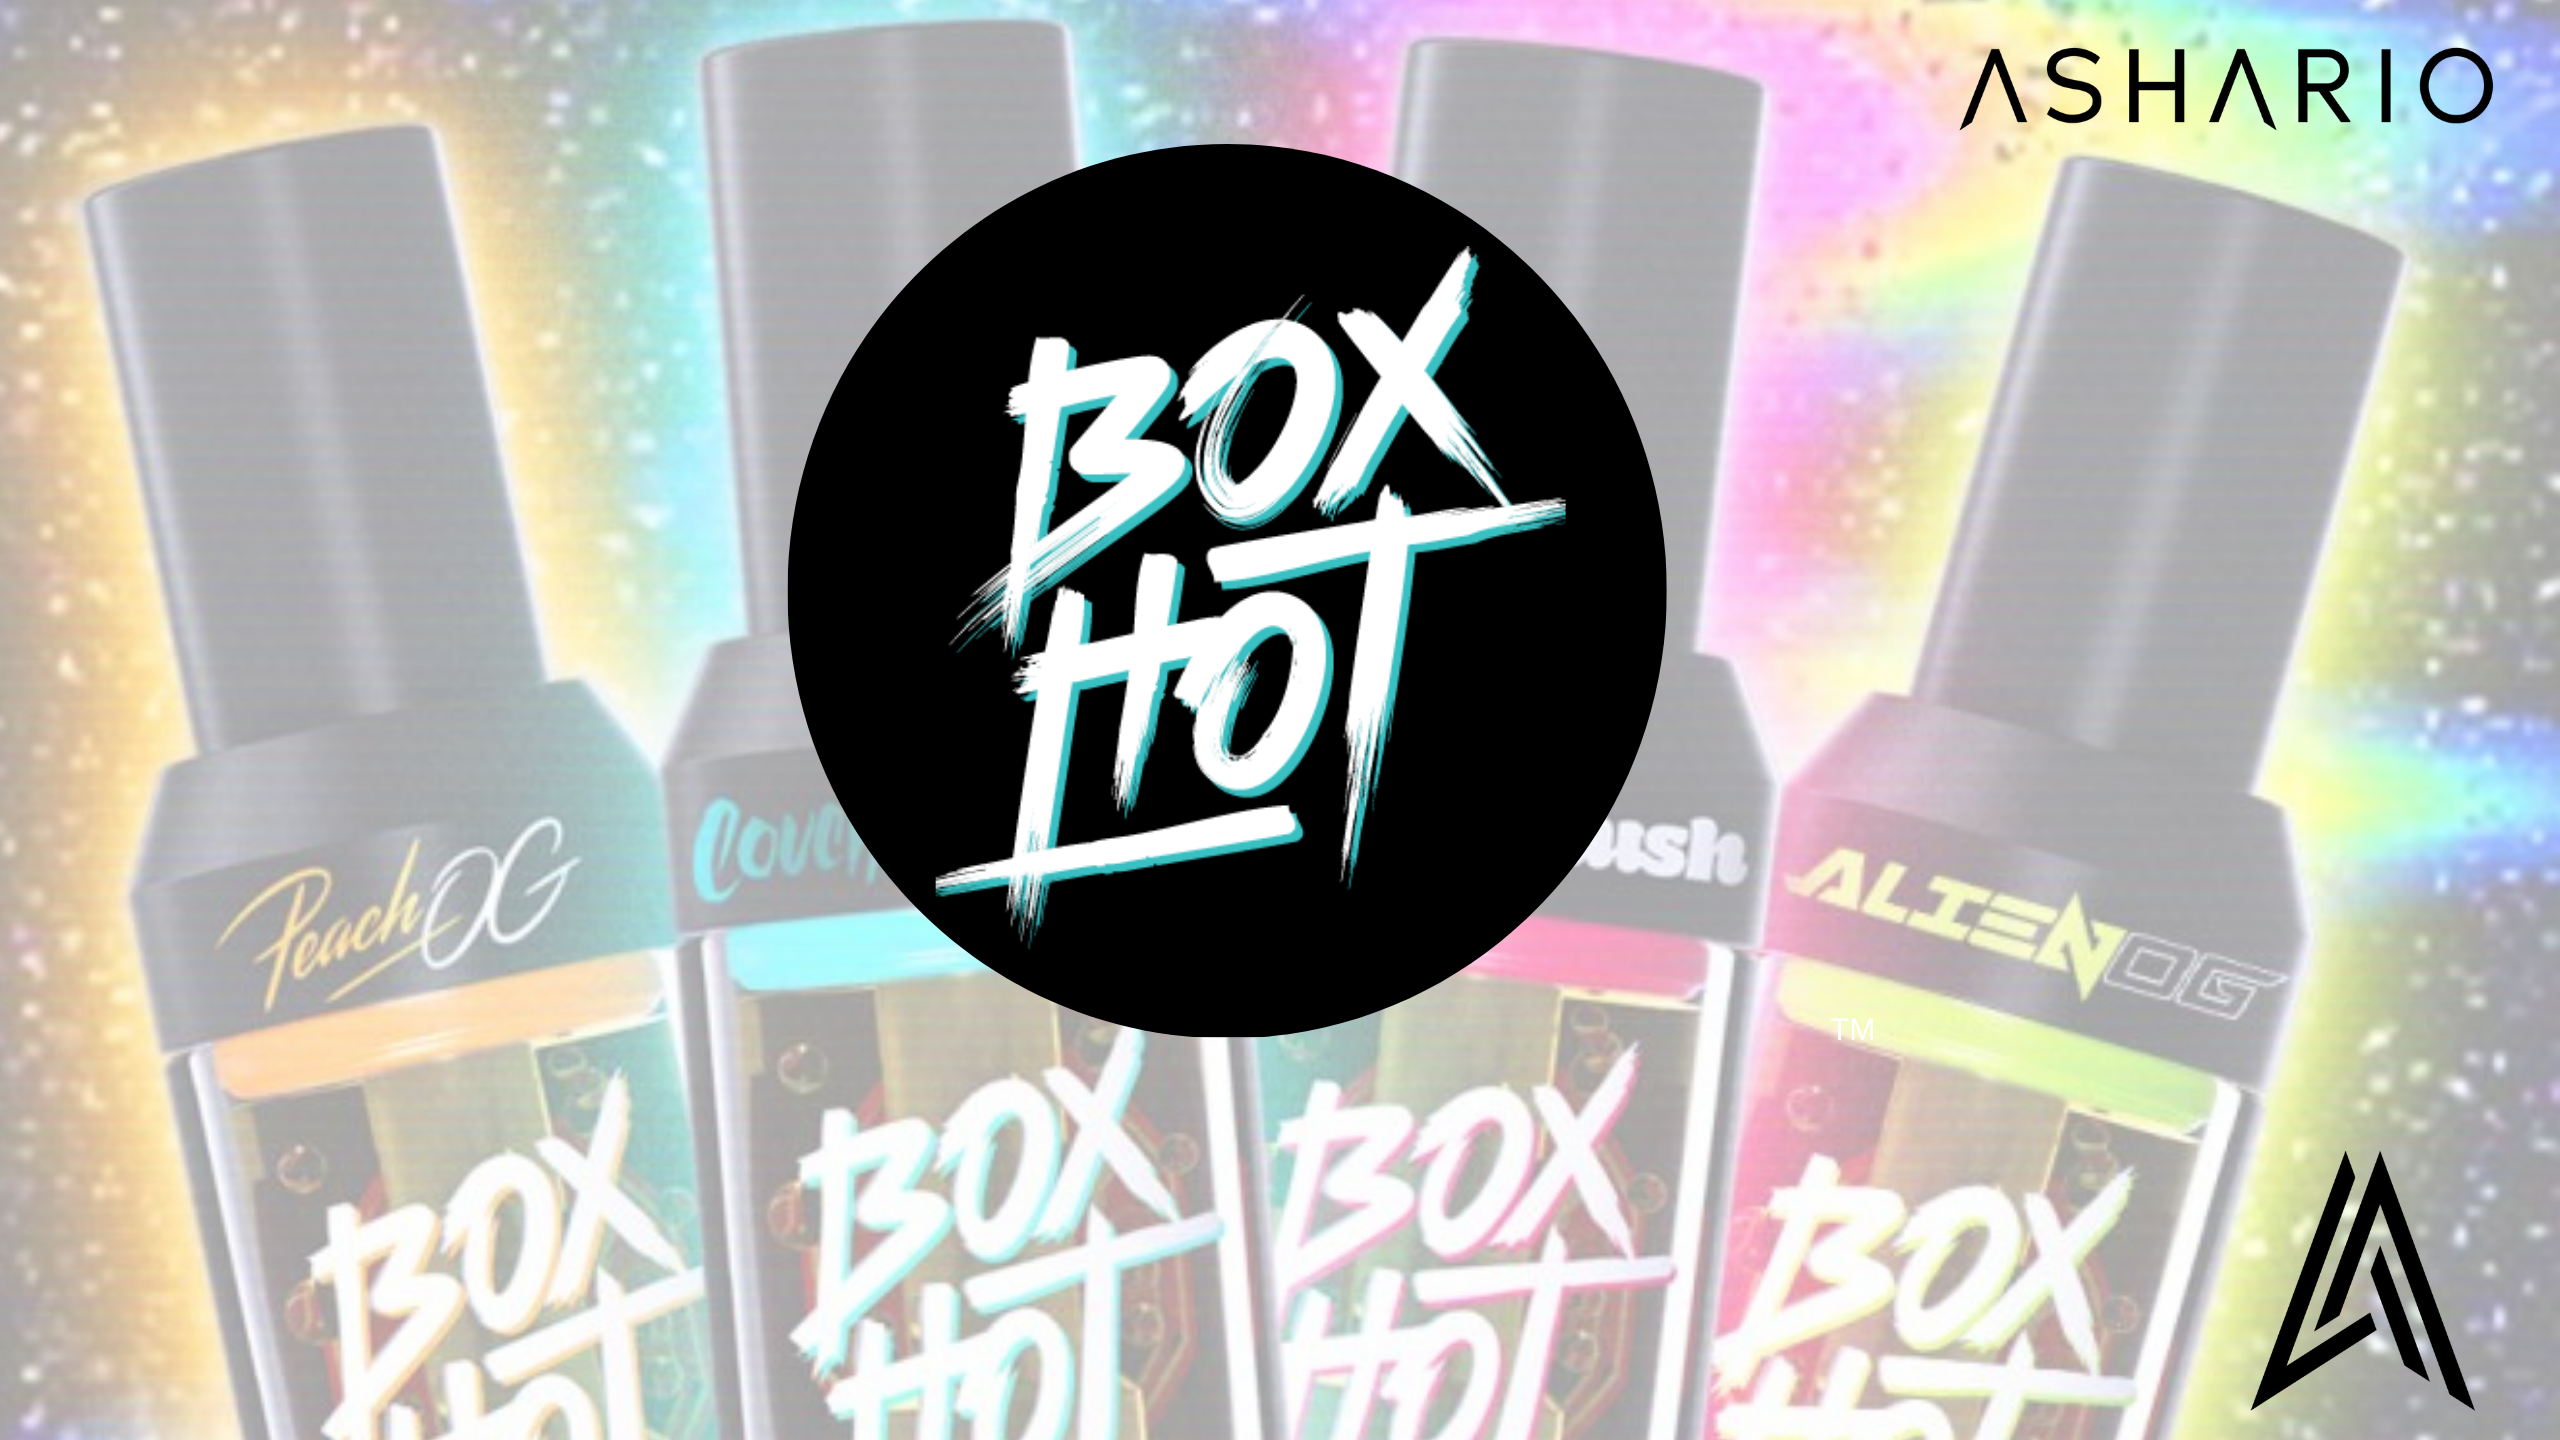 Learn about Boxhot, a premier cannabis brand known for excellence. Explore its origins, quality standards, and diverse product range at Ashario Cannabis Dispensary.